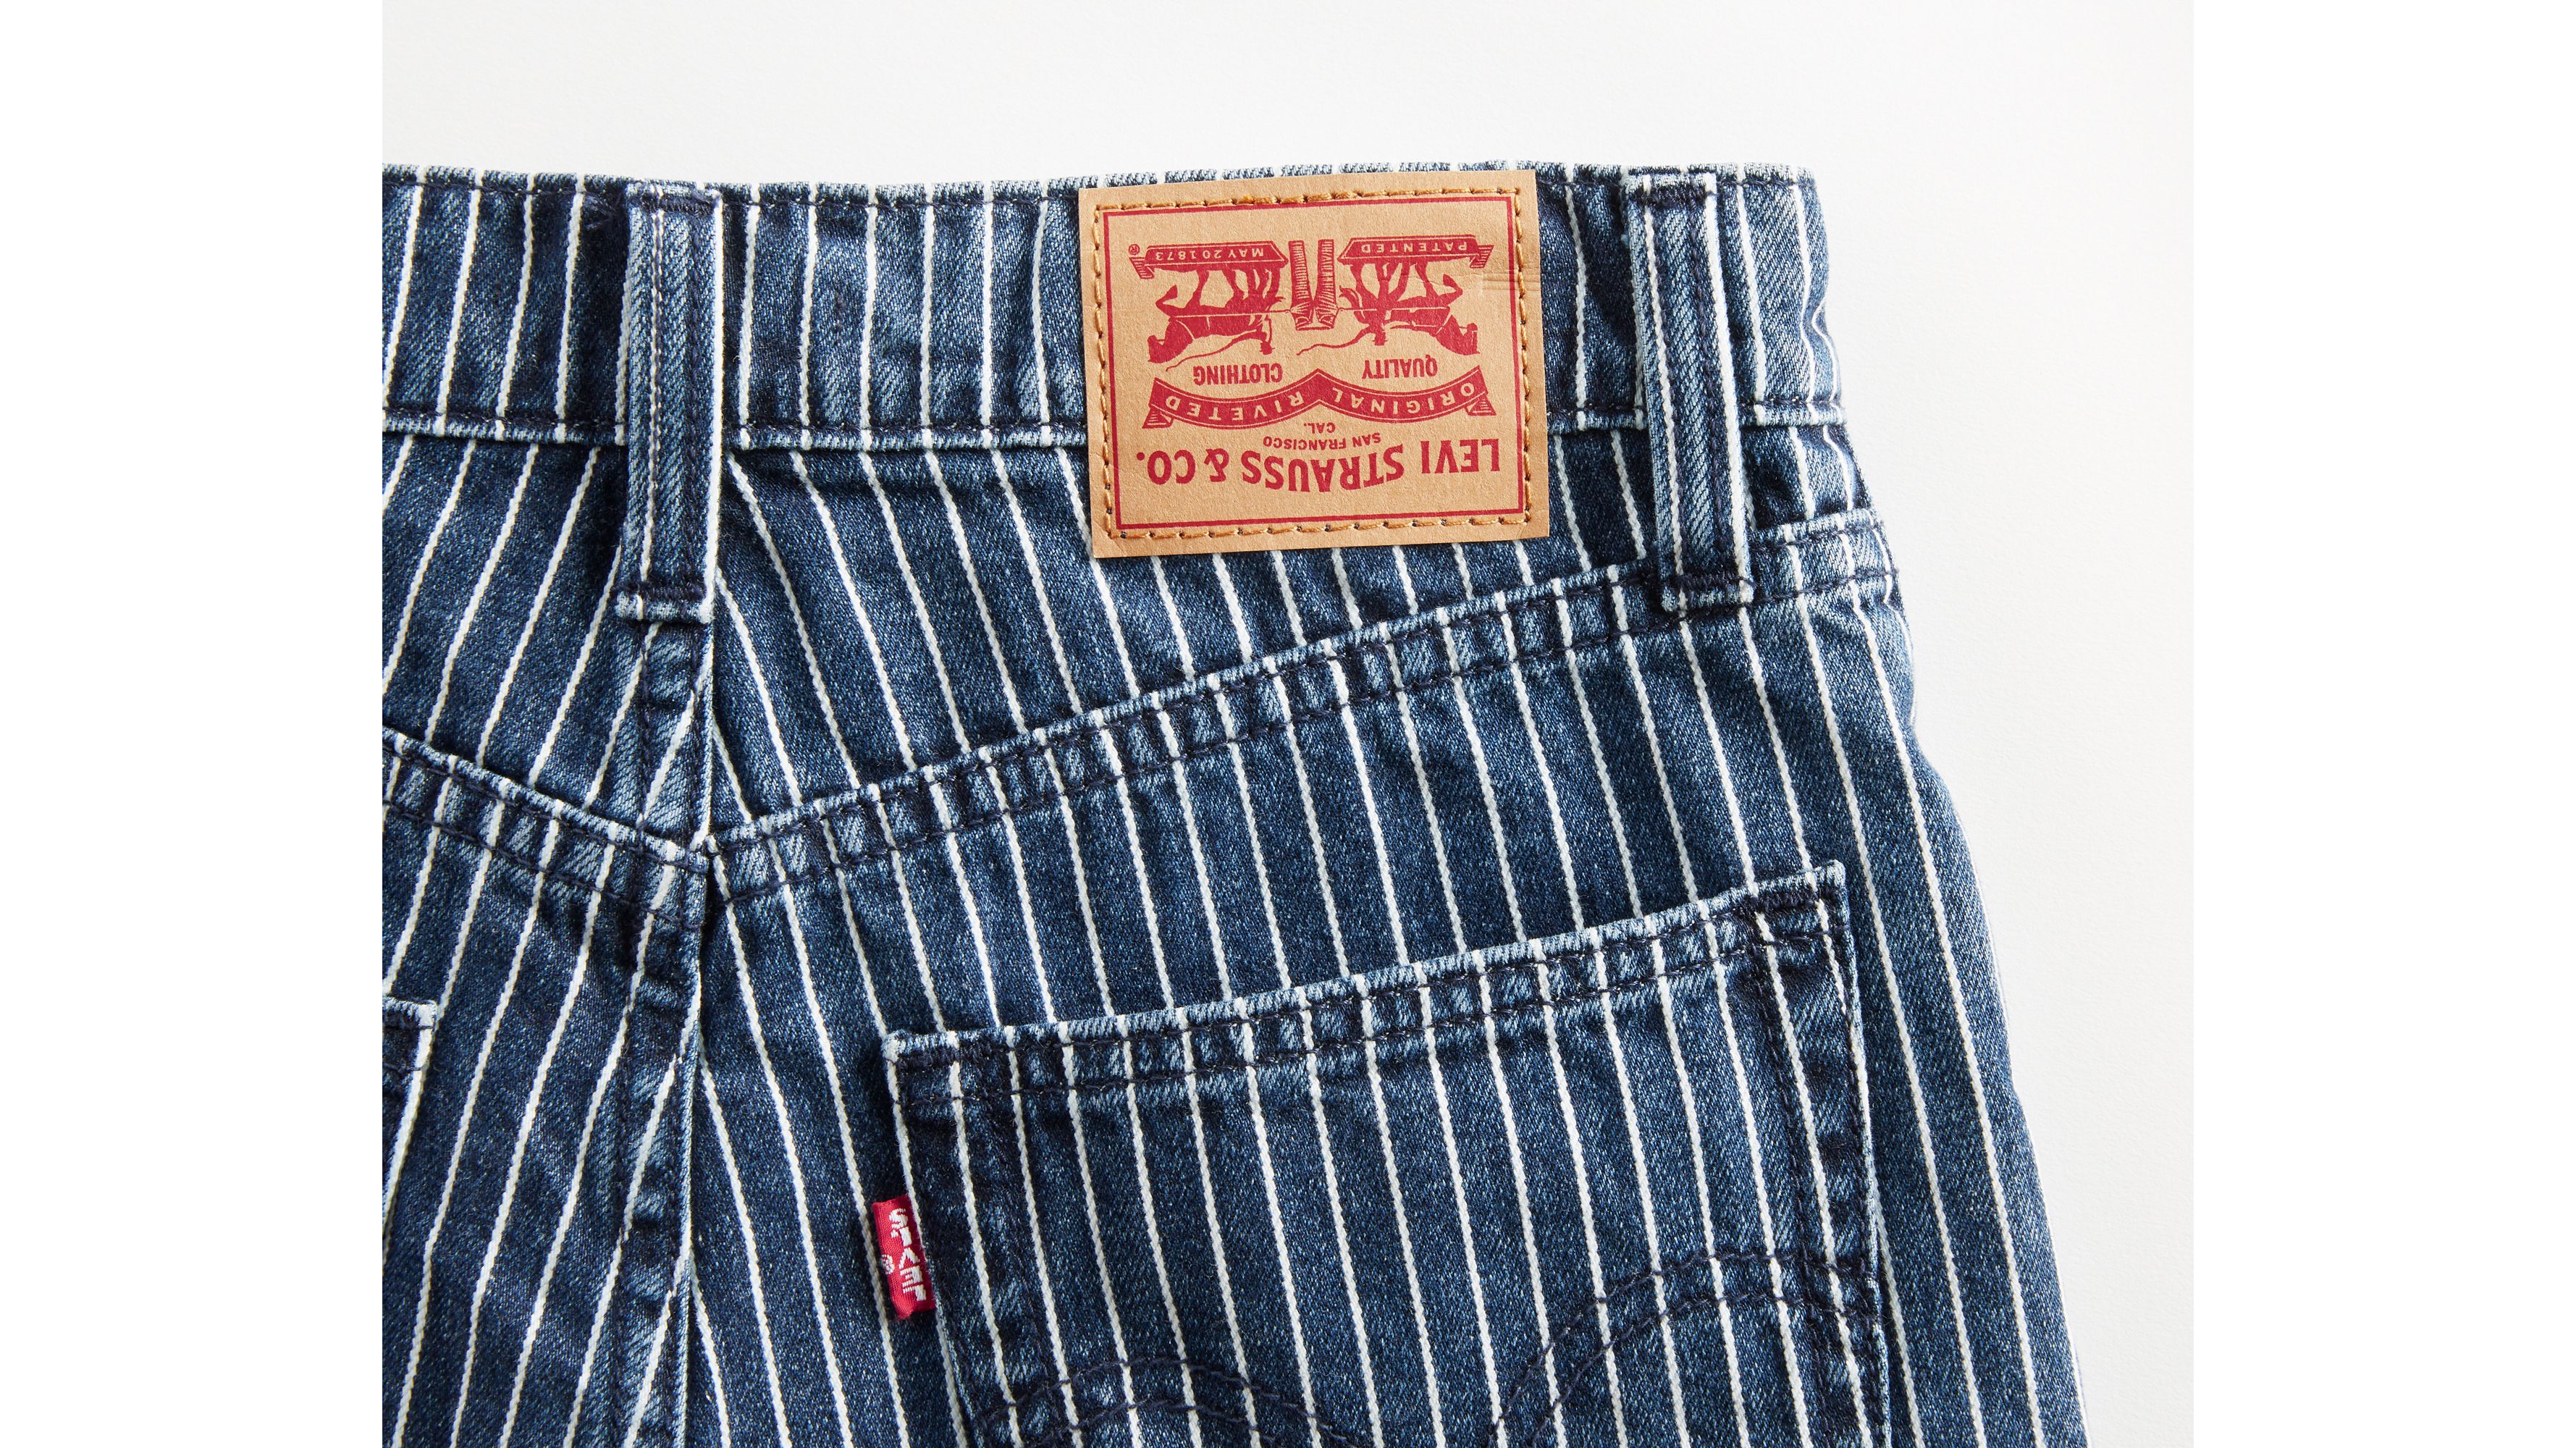 stranger things clothes levis